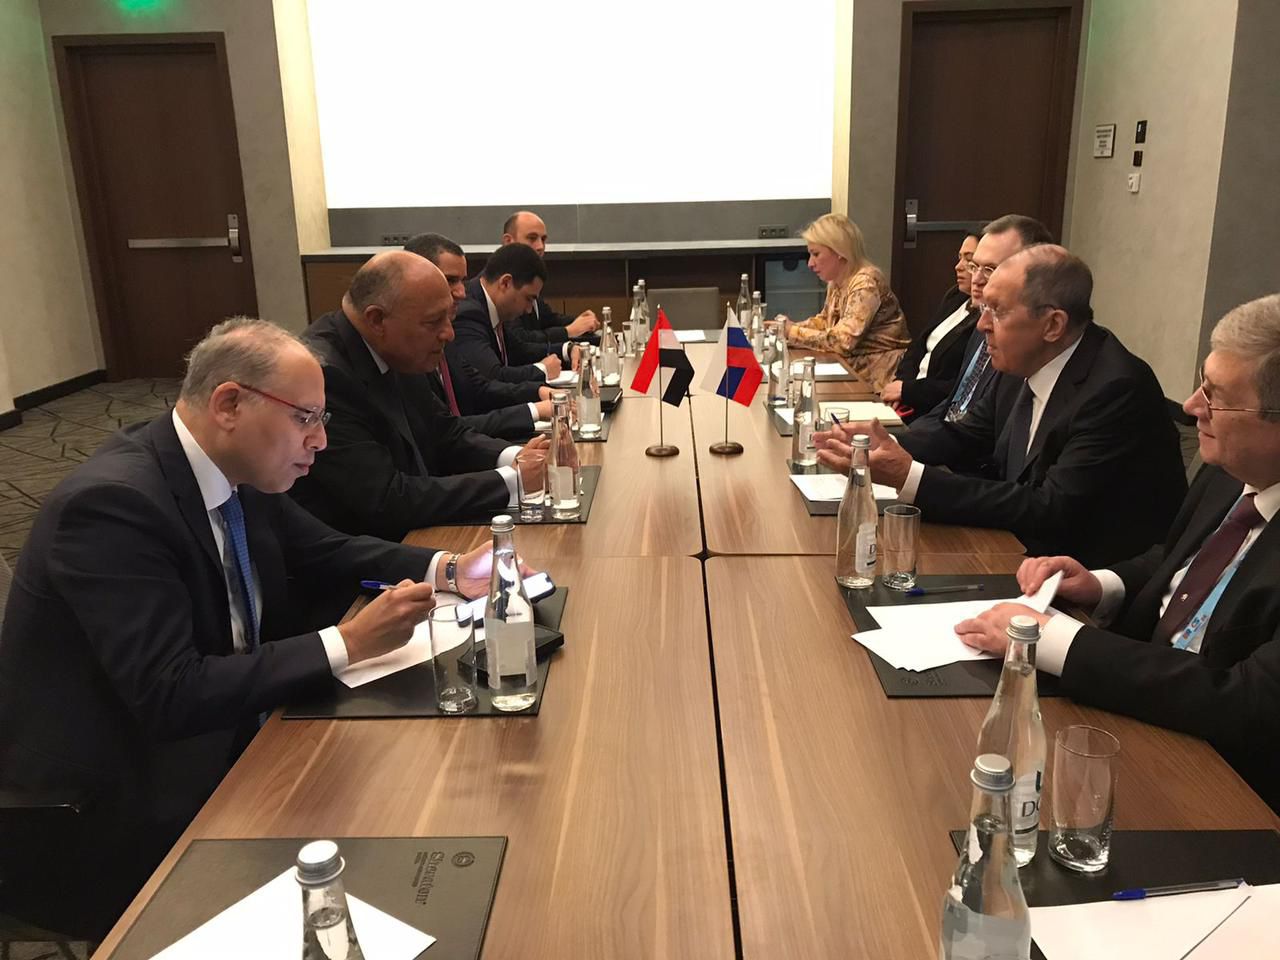 The Foreign Minister holds a discussion session with his Russian counterpart on the sidelines of the BRICS meetings